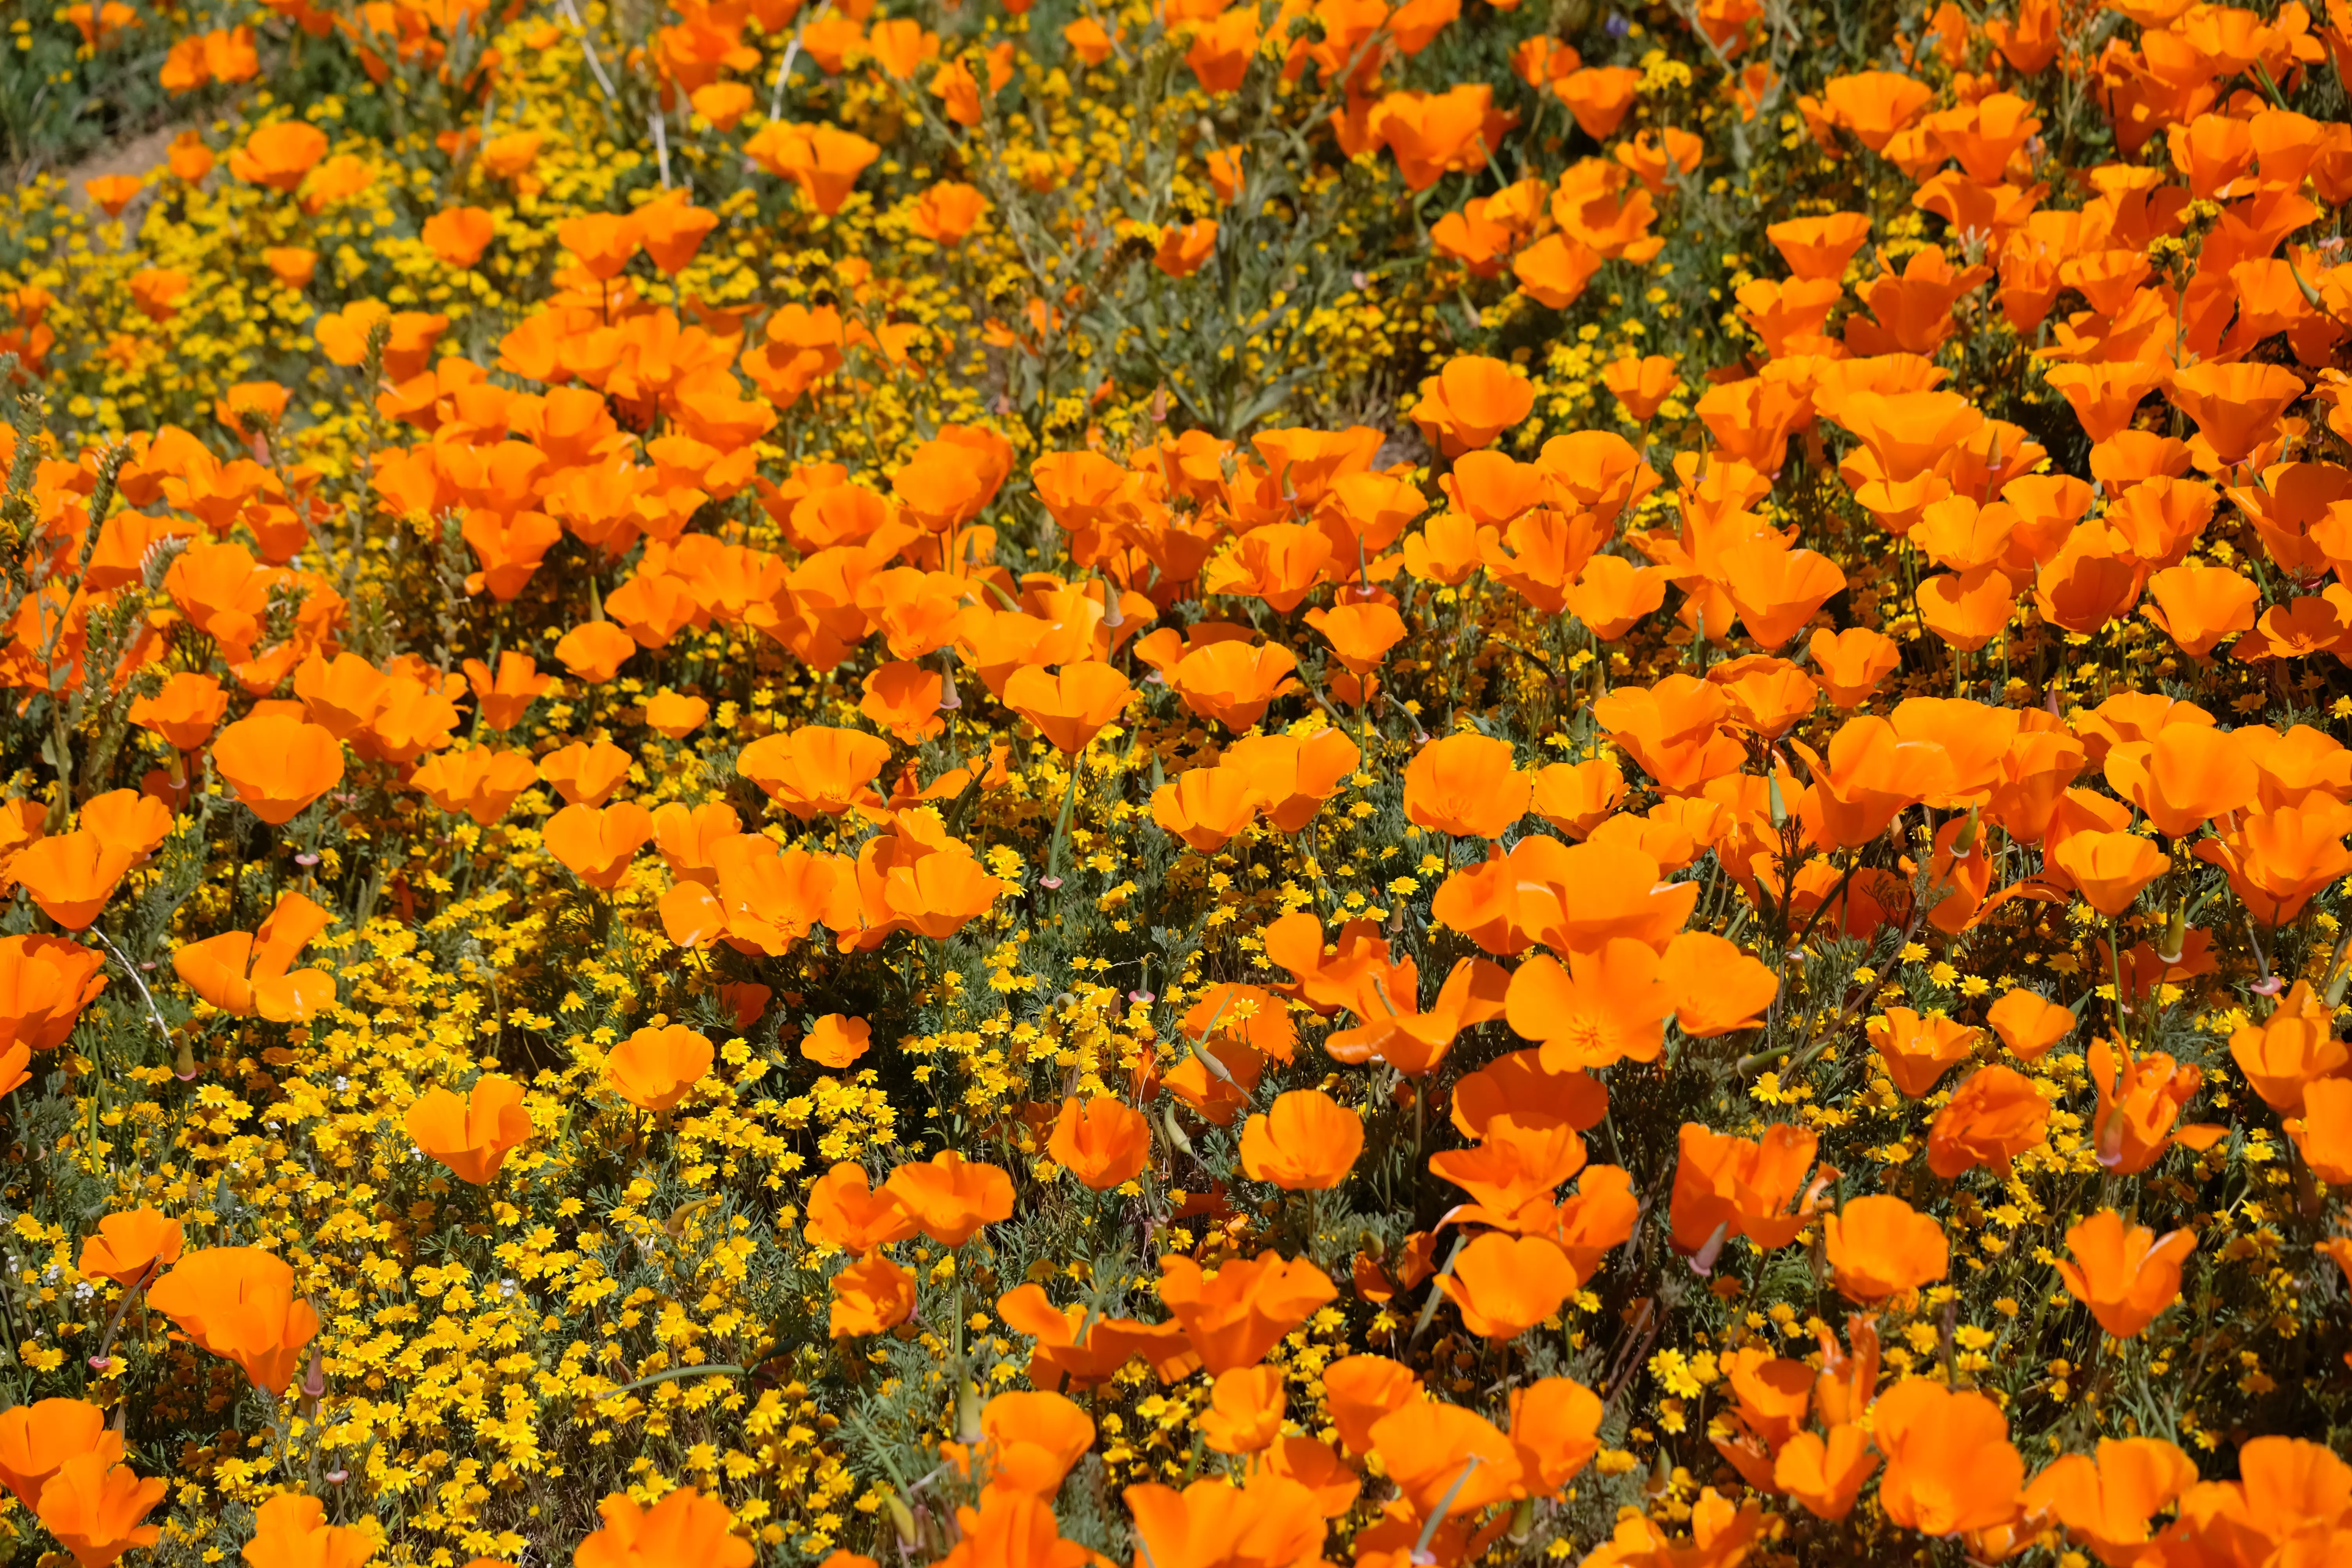 Image of California poppies in a superbloom